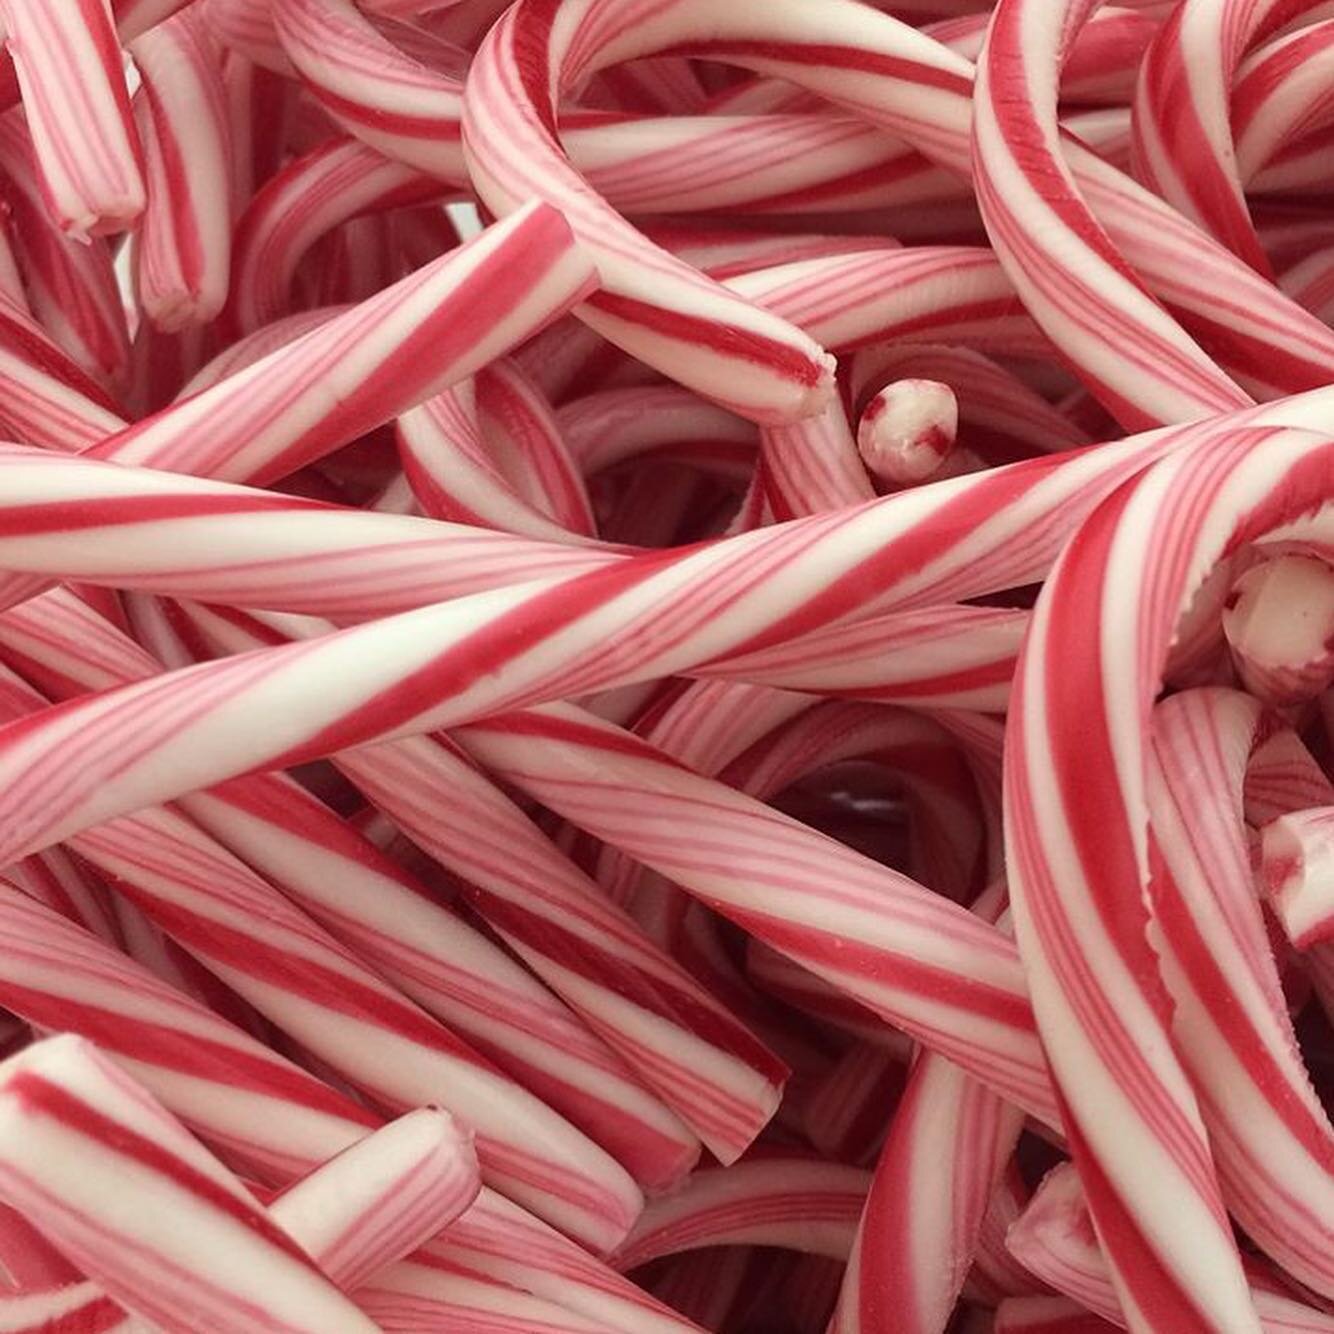 These right here are pics of a very special creation that is coming to market tomorrow. Peppermint stick gelato is customer favorite and this super limited edition only available at market is not too be missed! Pre-order via their website @sweetdoege